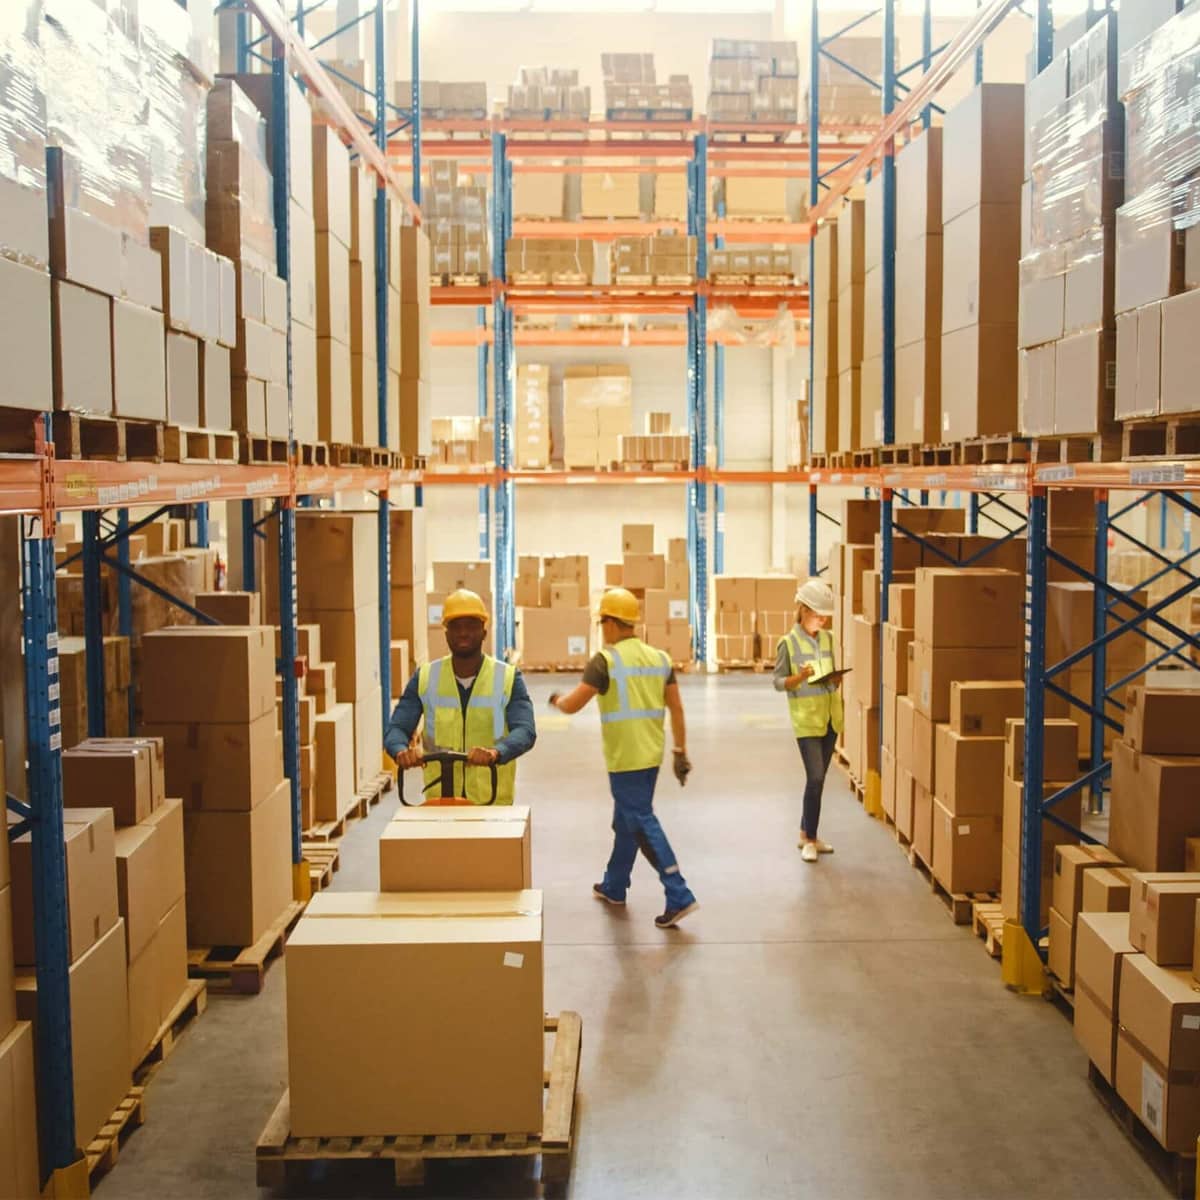 Retail Warehouse full of Shelves with Goods in Cardboard Boxes, Workers Scan and Sort Packages, Move Inventory with Pallet Trucks and Forklifts